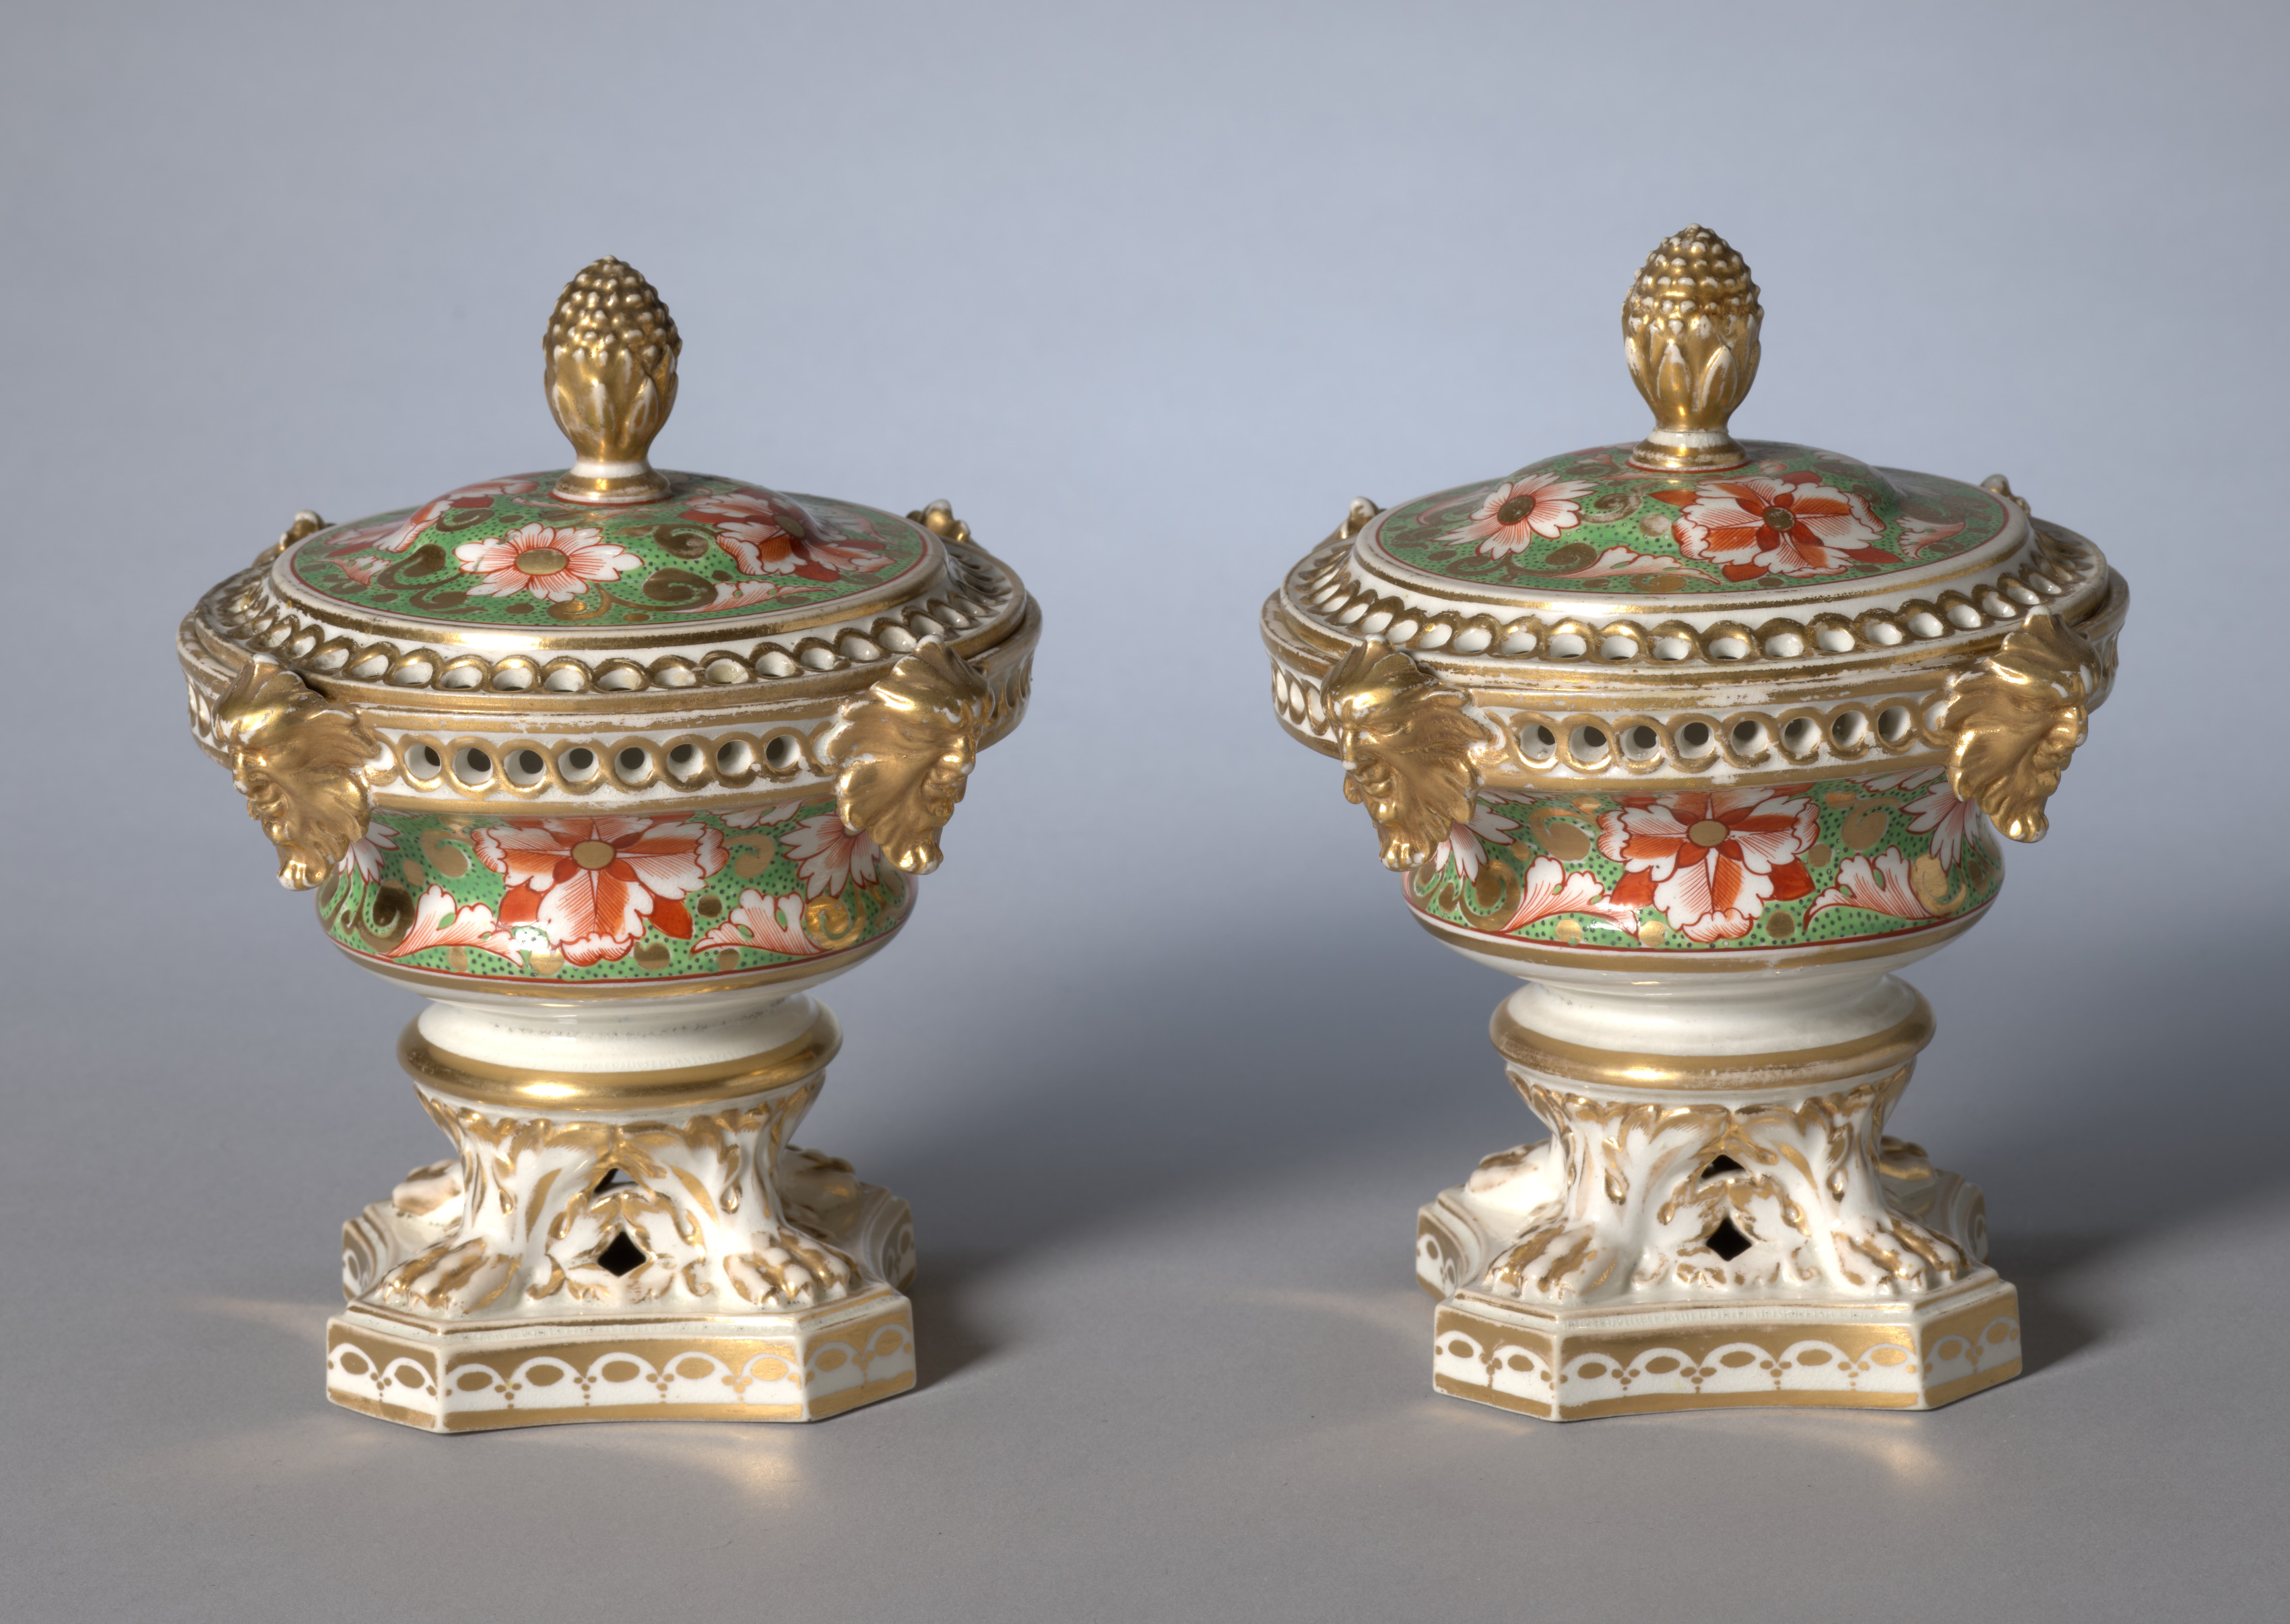 Pair of Potpourri Vases with Covers